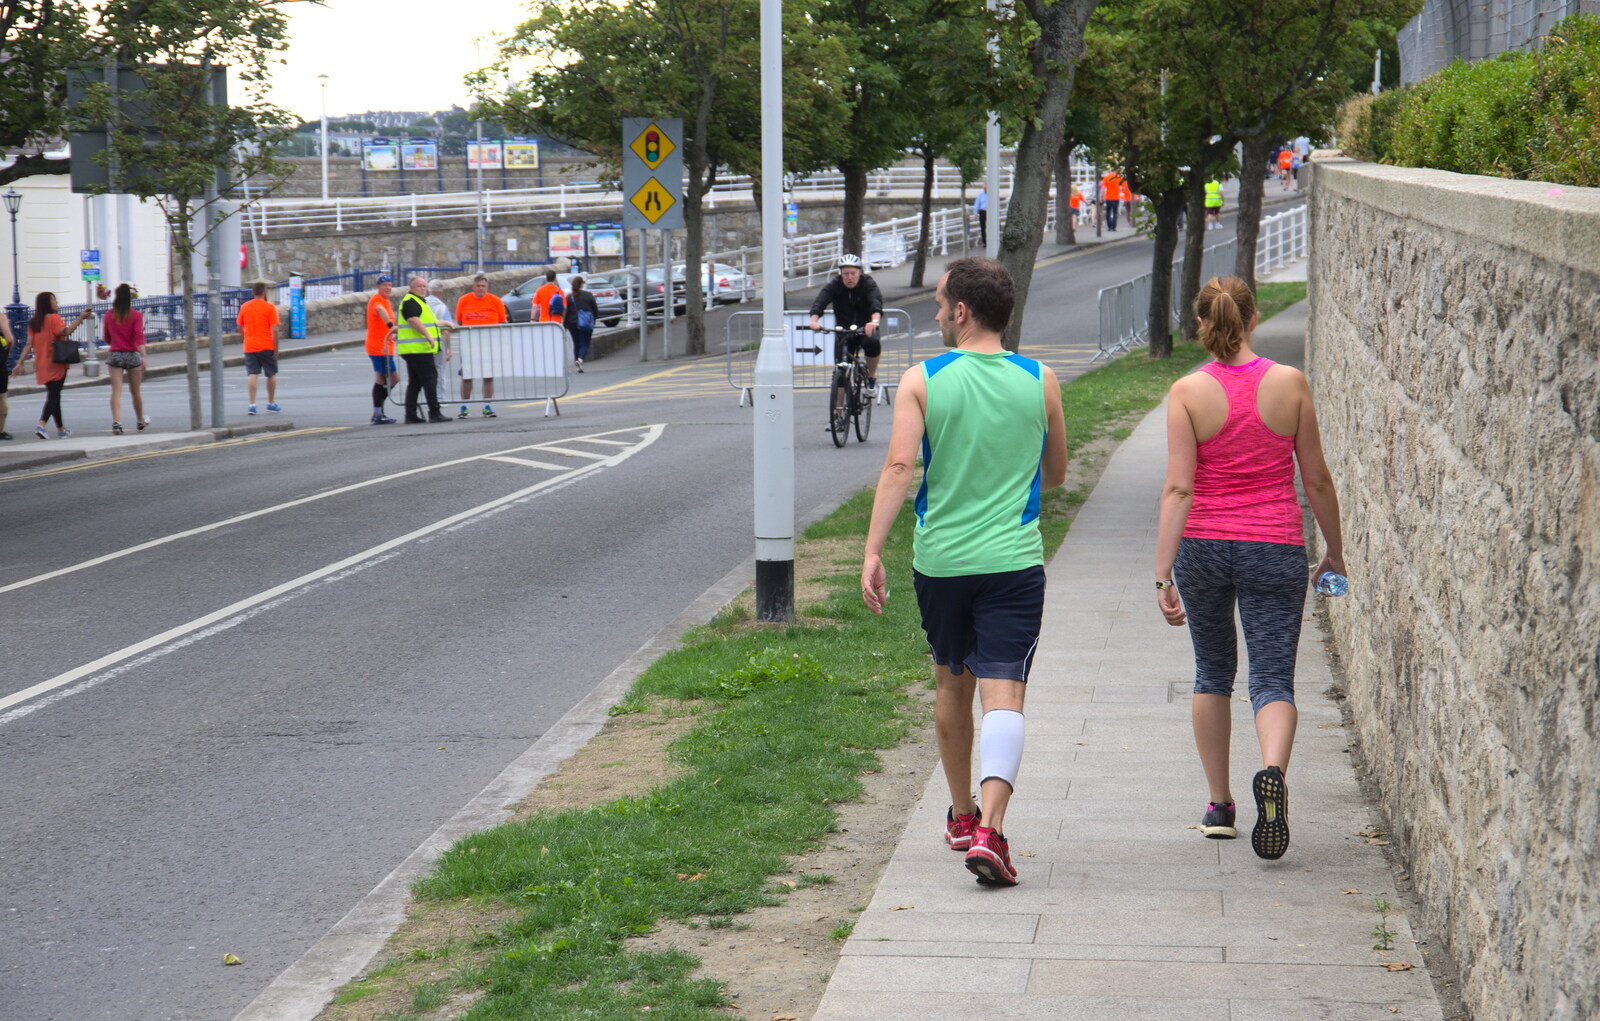 Jamie and Isobel walk down the street to the start from The Dún Laoghaire 10k Run, County Dublin, Ireland - 6th August 2018